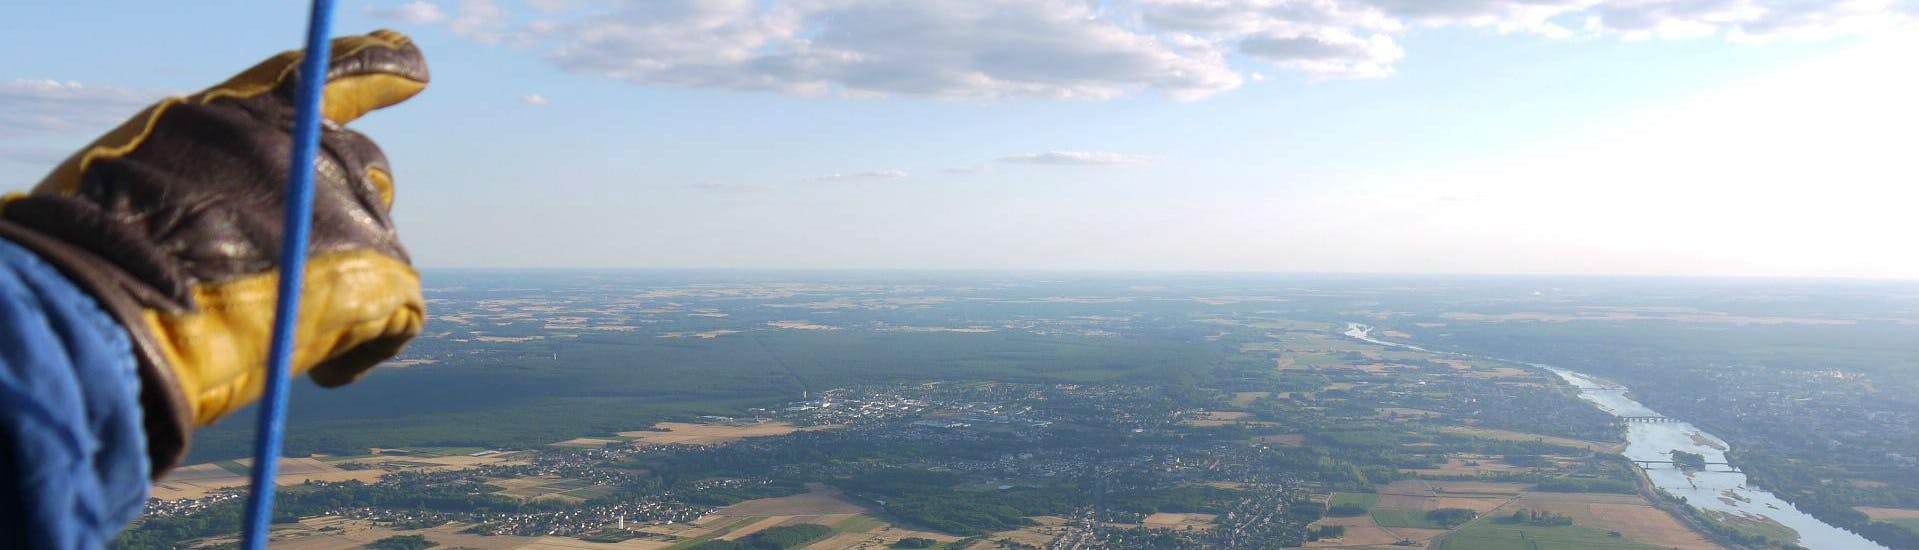 Balloon Ride from Blois-Chambord over Loire Valley Castles.